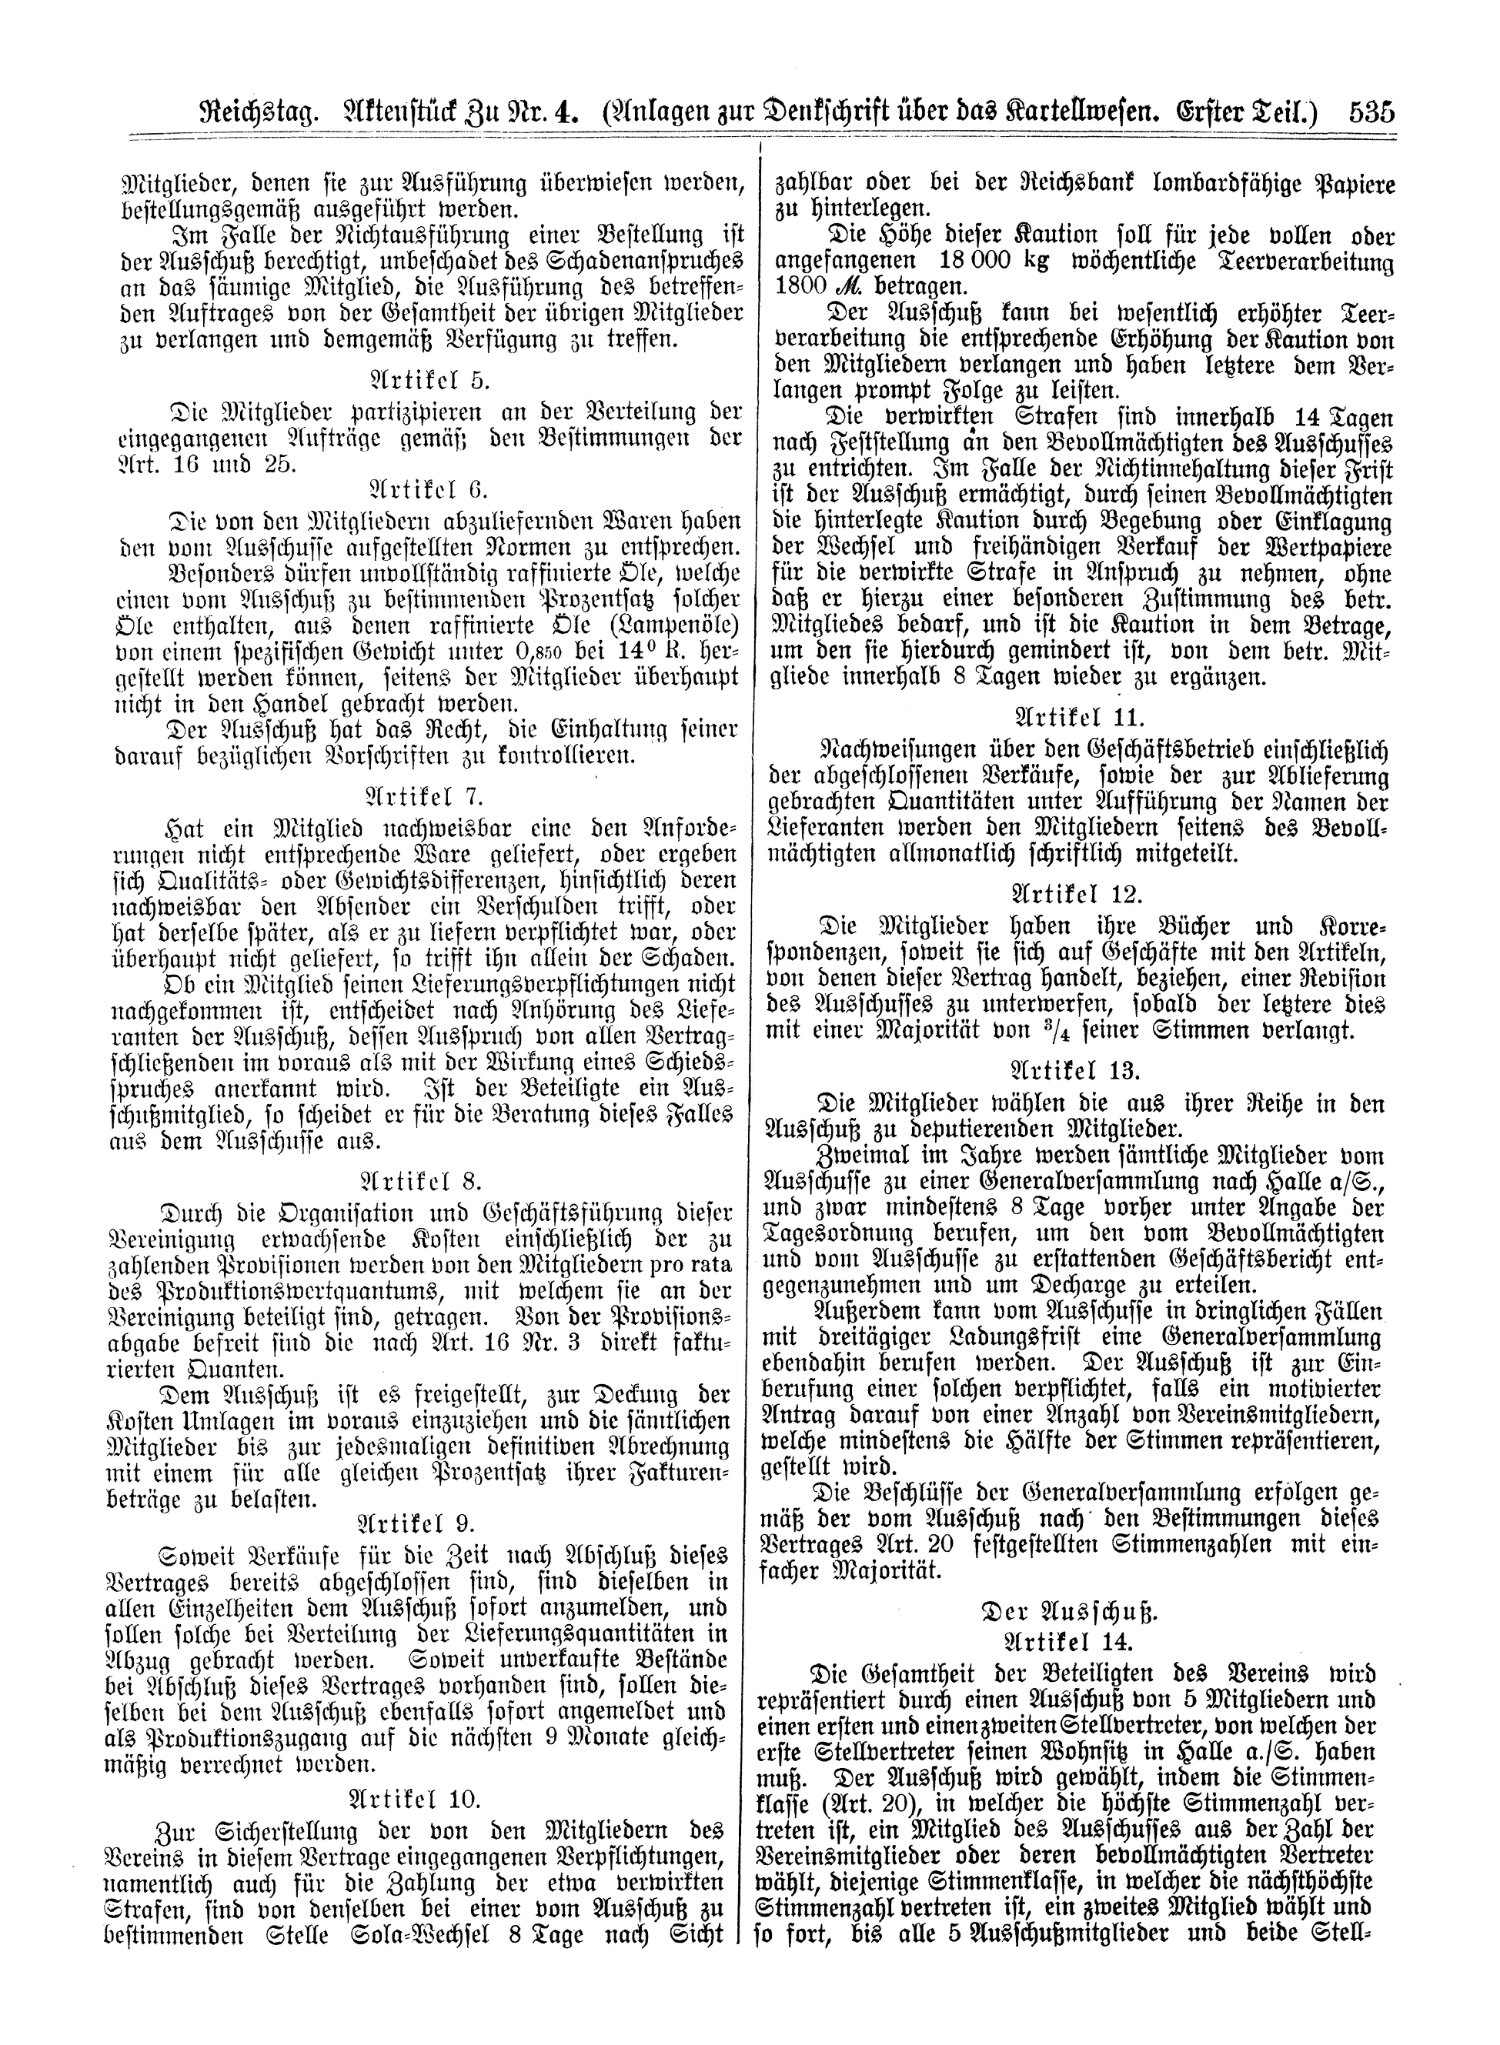 Scan of page 535